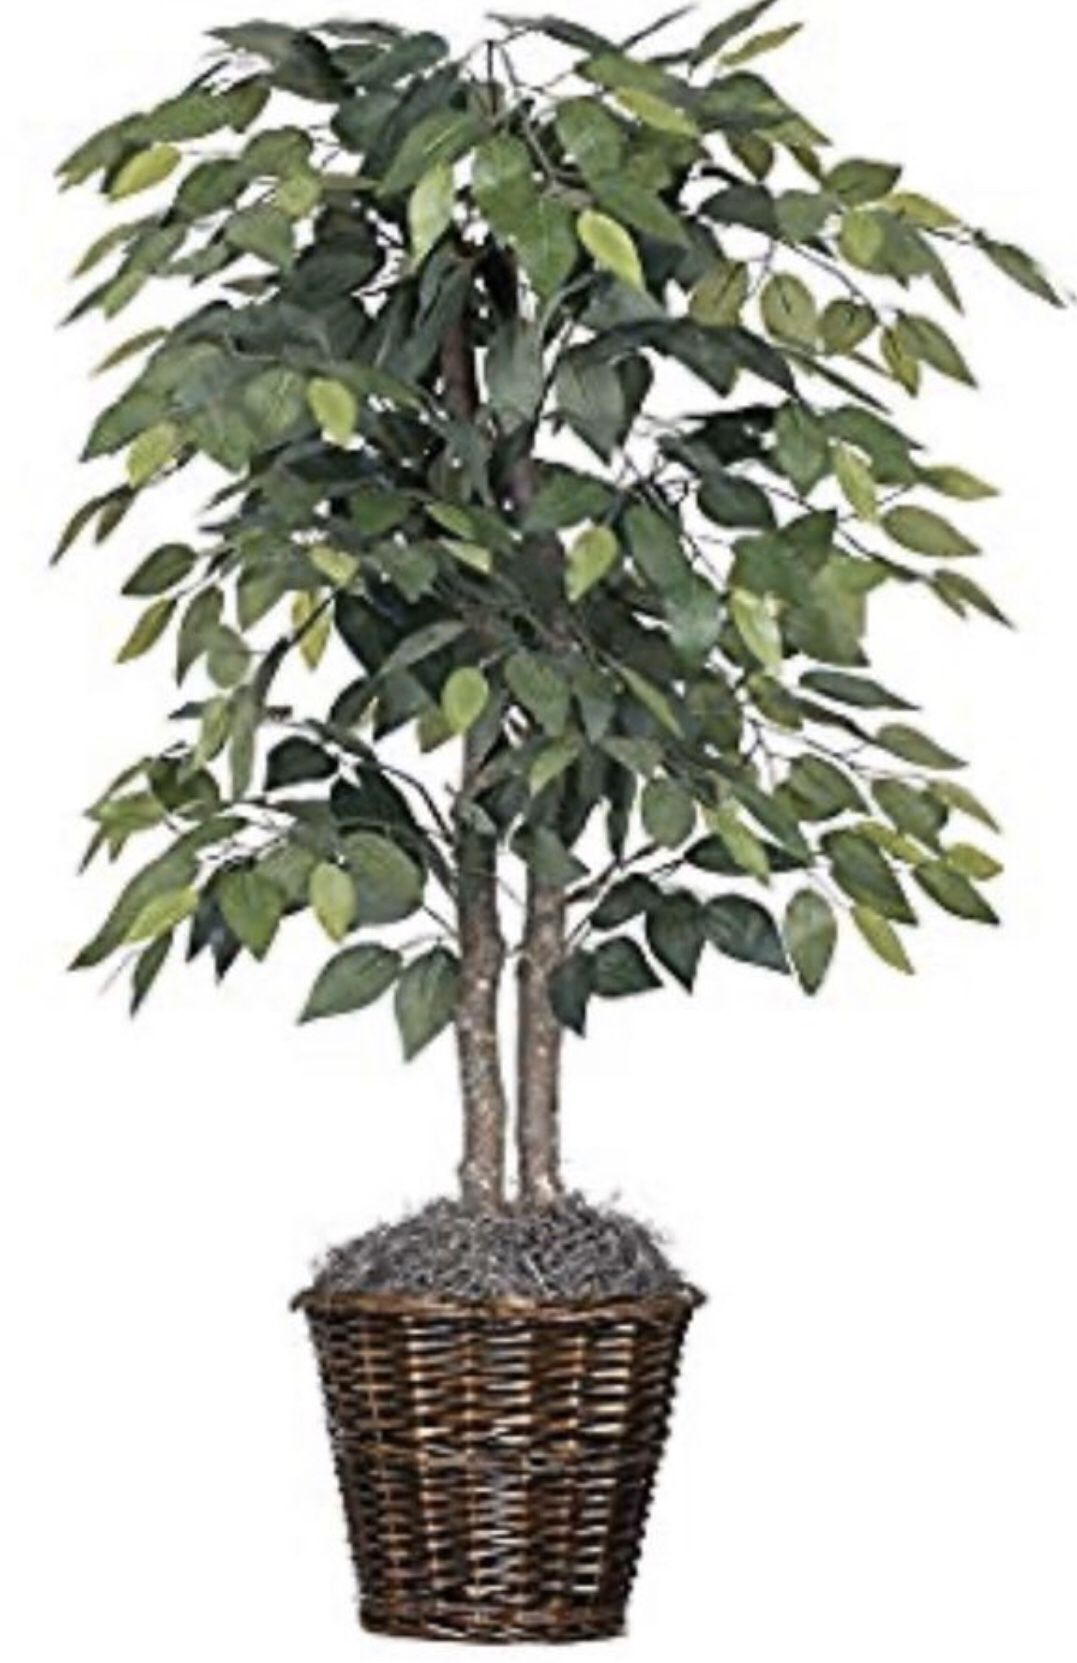 Artificial Natural Ficus Bush with Dark Green Leaves in Artificial Plant Ficus with Basket BRAND NEW 4 feet Beautiful Fake Plant